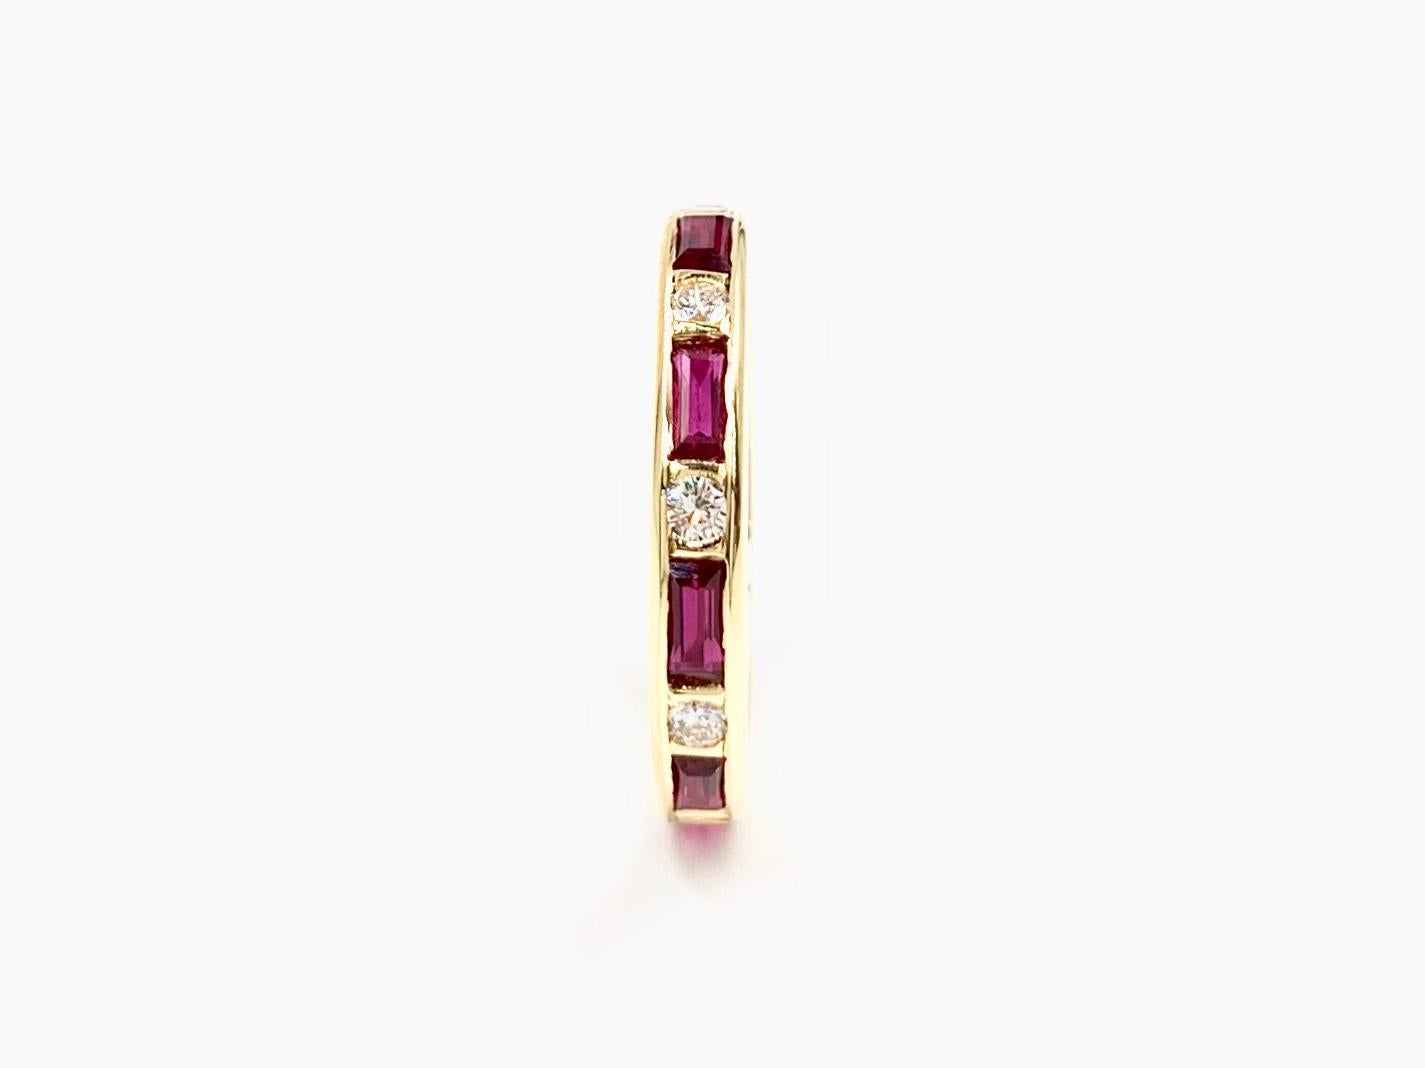 Timeless 18 karat yellow gold 3mm wedding band or stacking ring featuring alternating channel set horizontal baguette cut rubies and round brilliant diamonds. Vivid, well saturated rubies have a total weight of 1.17 carats. Round brilliant diamonds